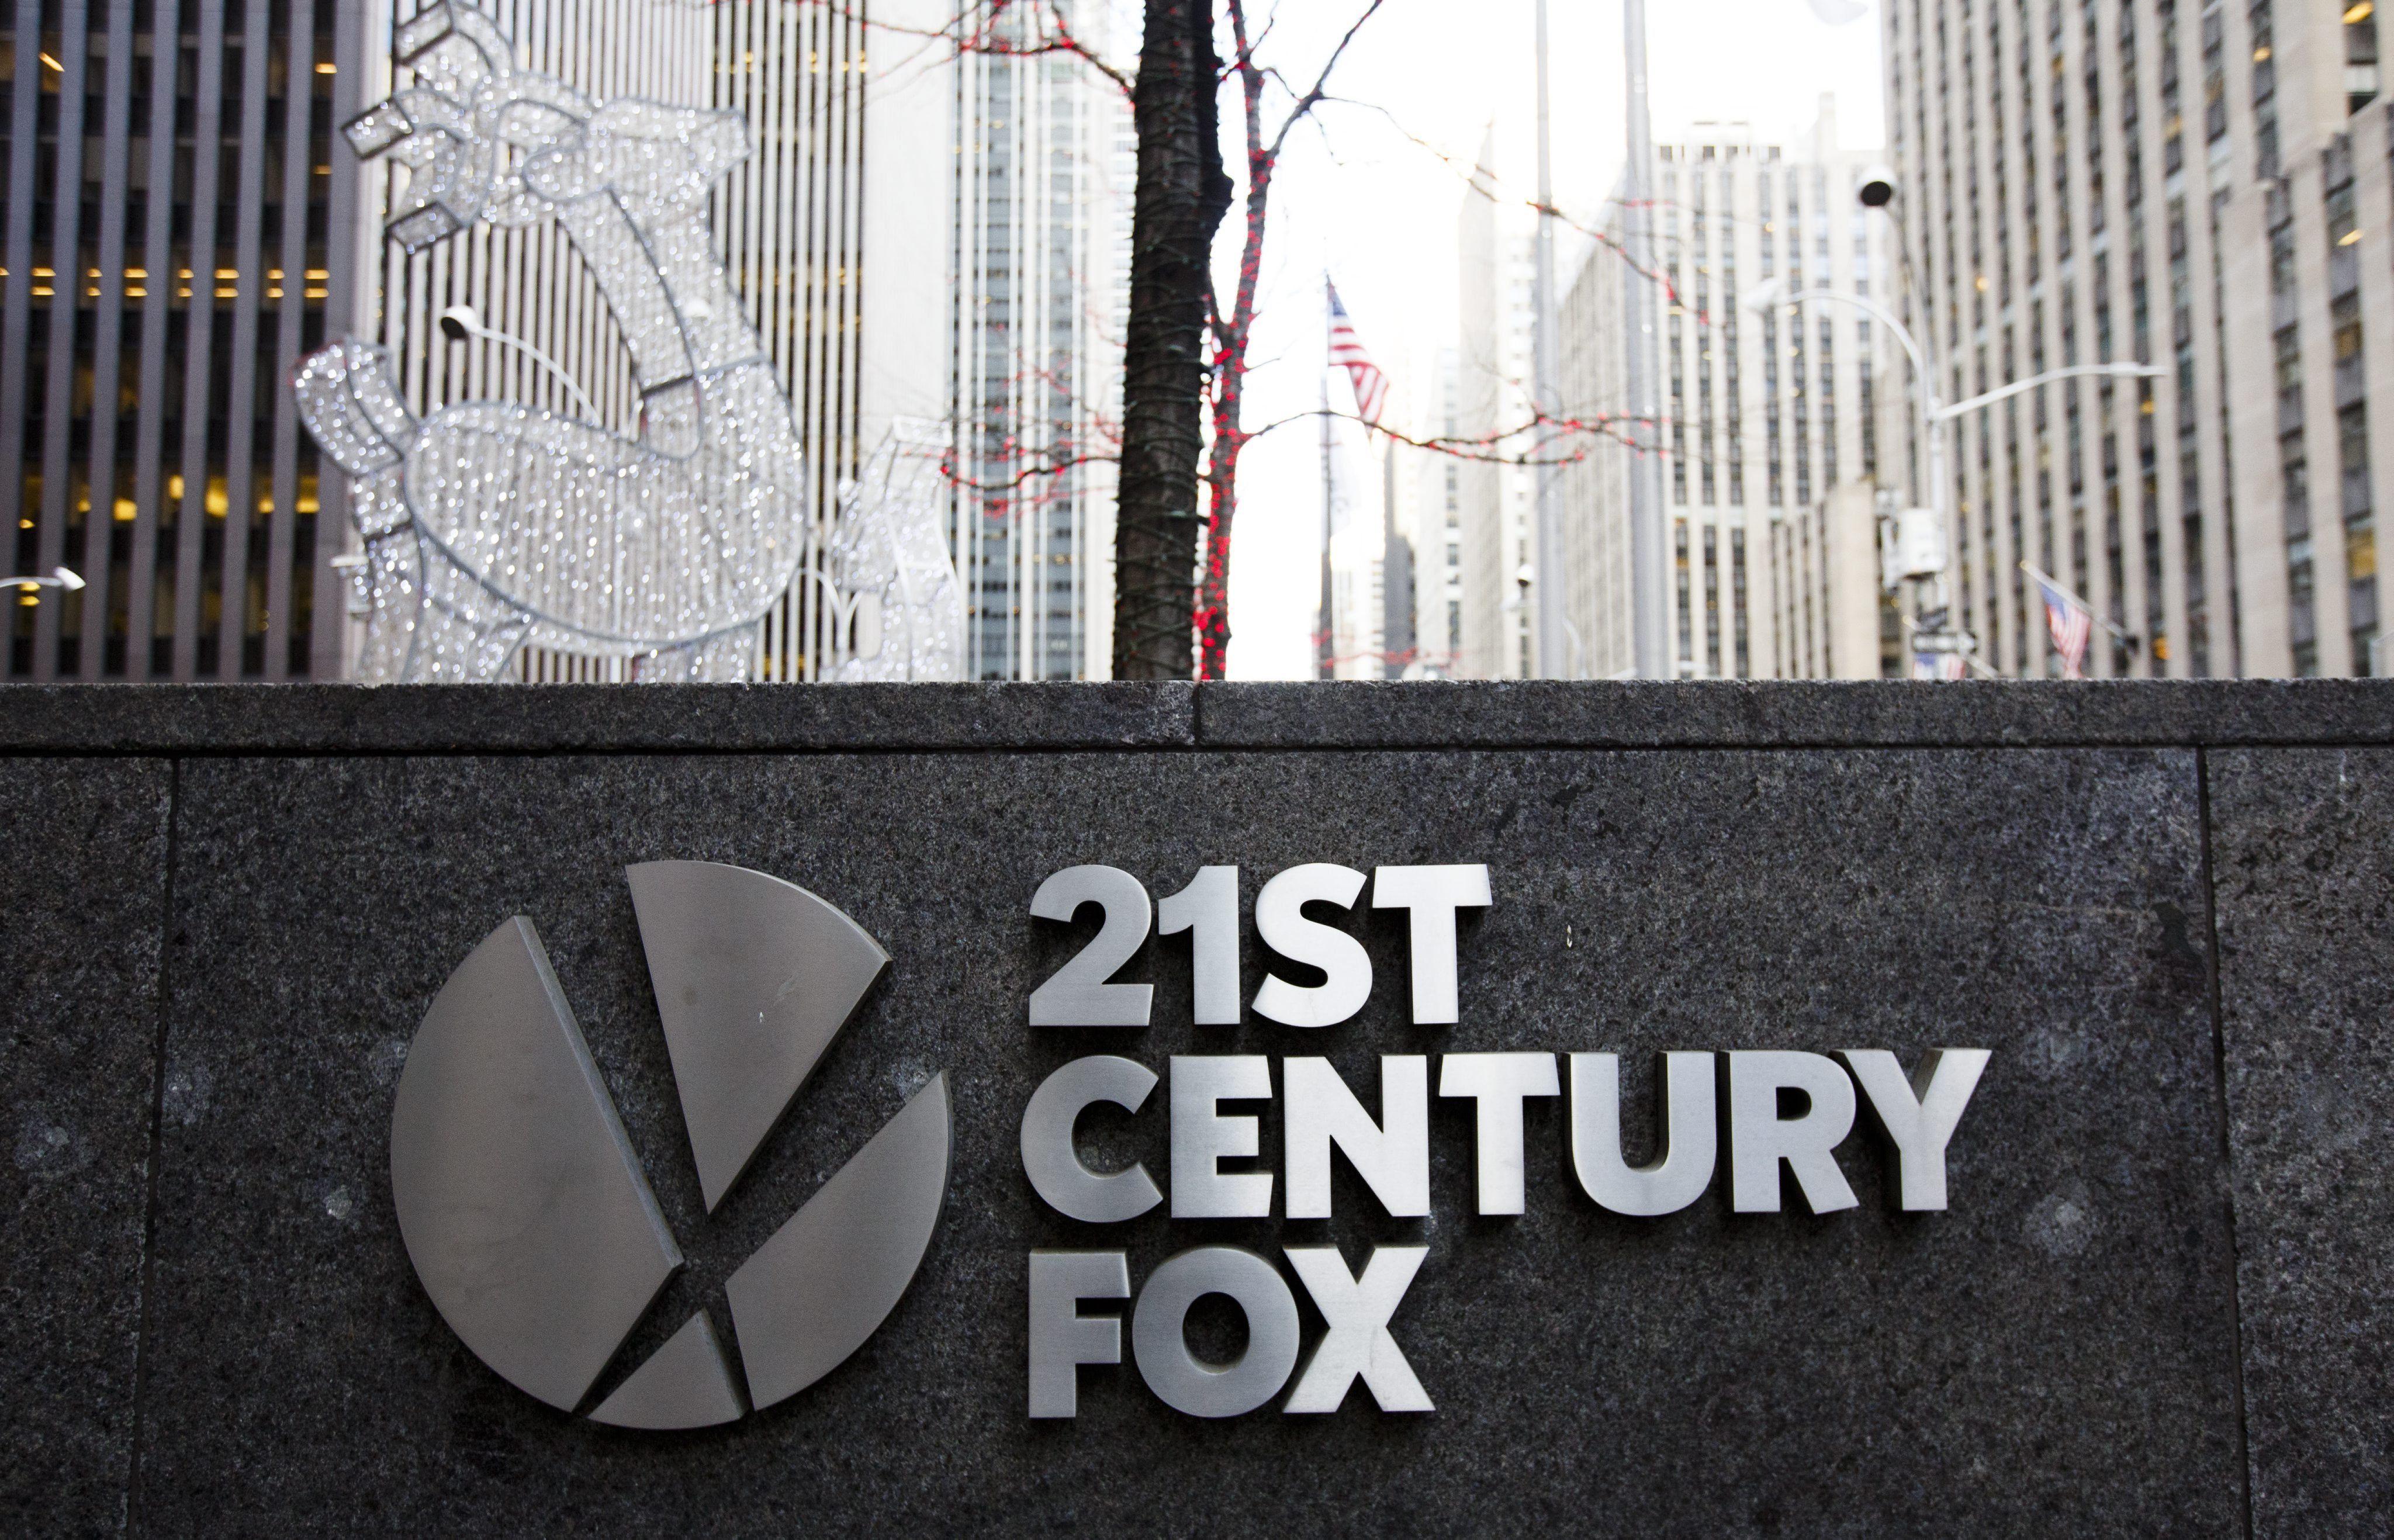 Century Cable Logo - Cable TV Business Buoys Earnings at 21st Century Fox